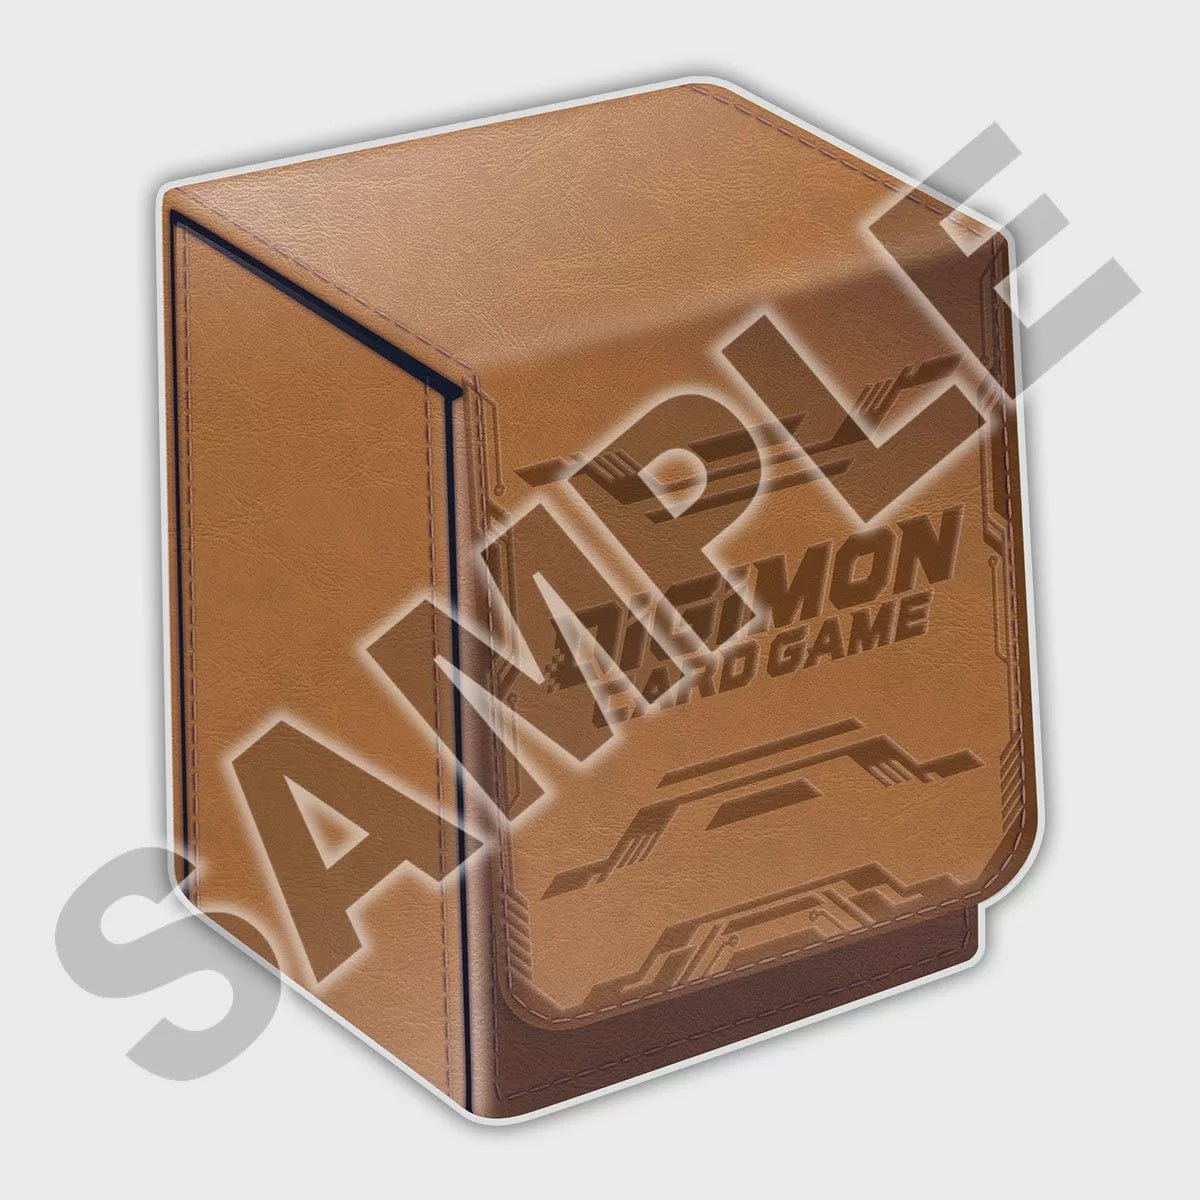 digimon card game Digimon Card Game Deck Box and Card Set Brown